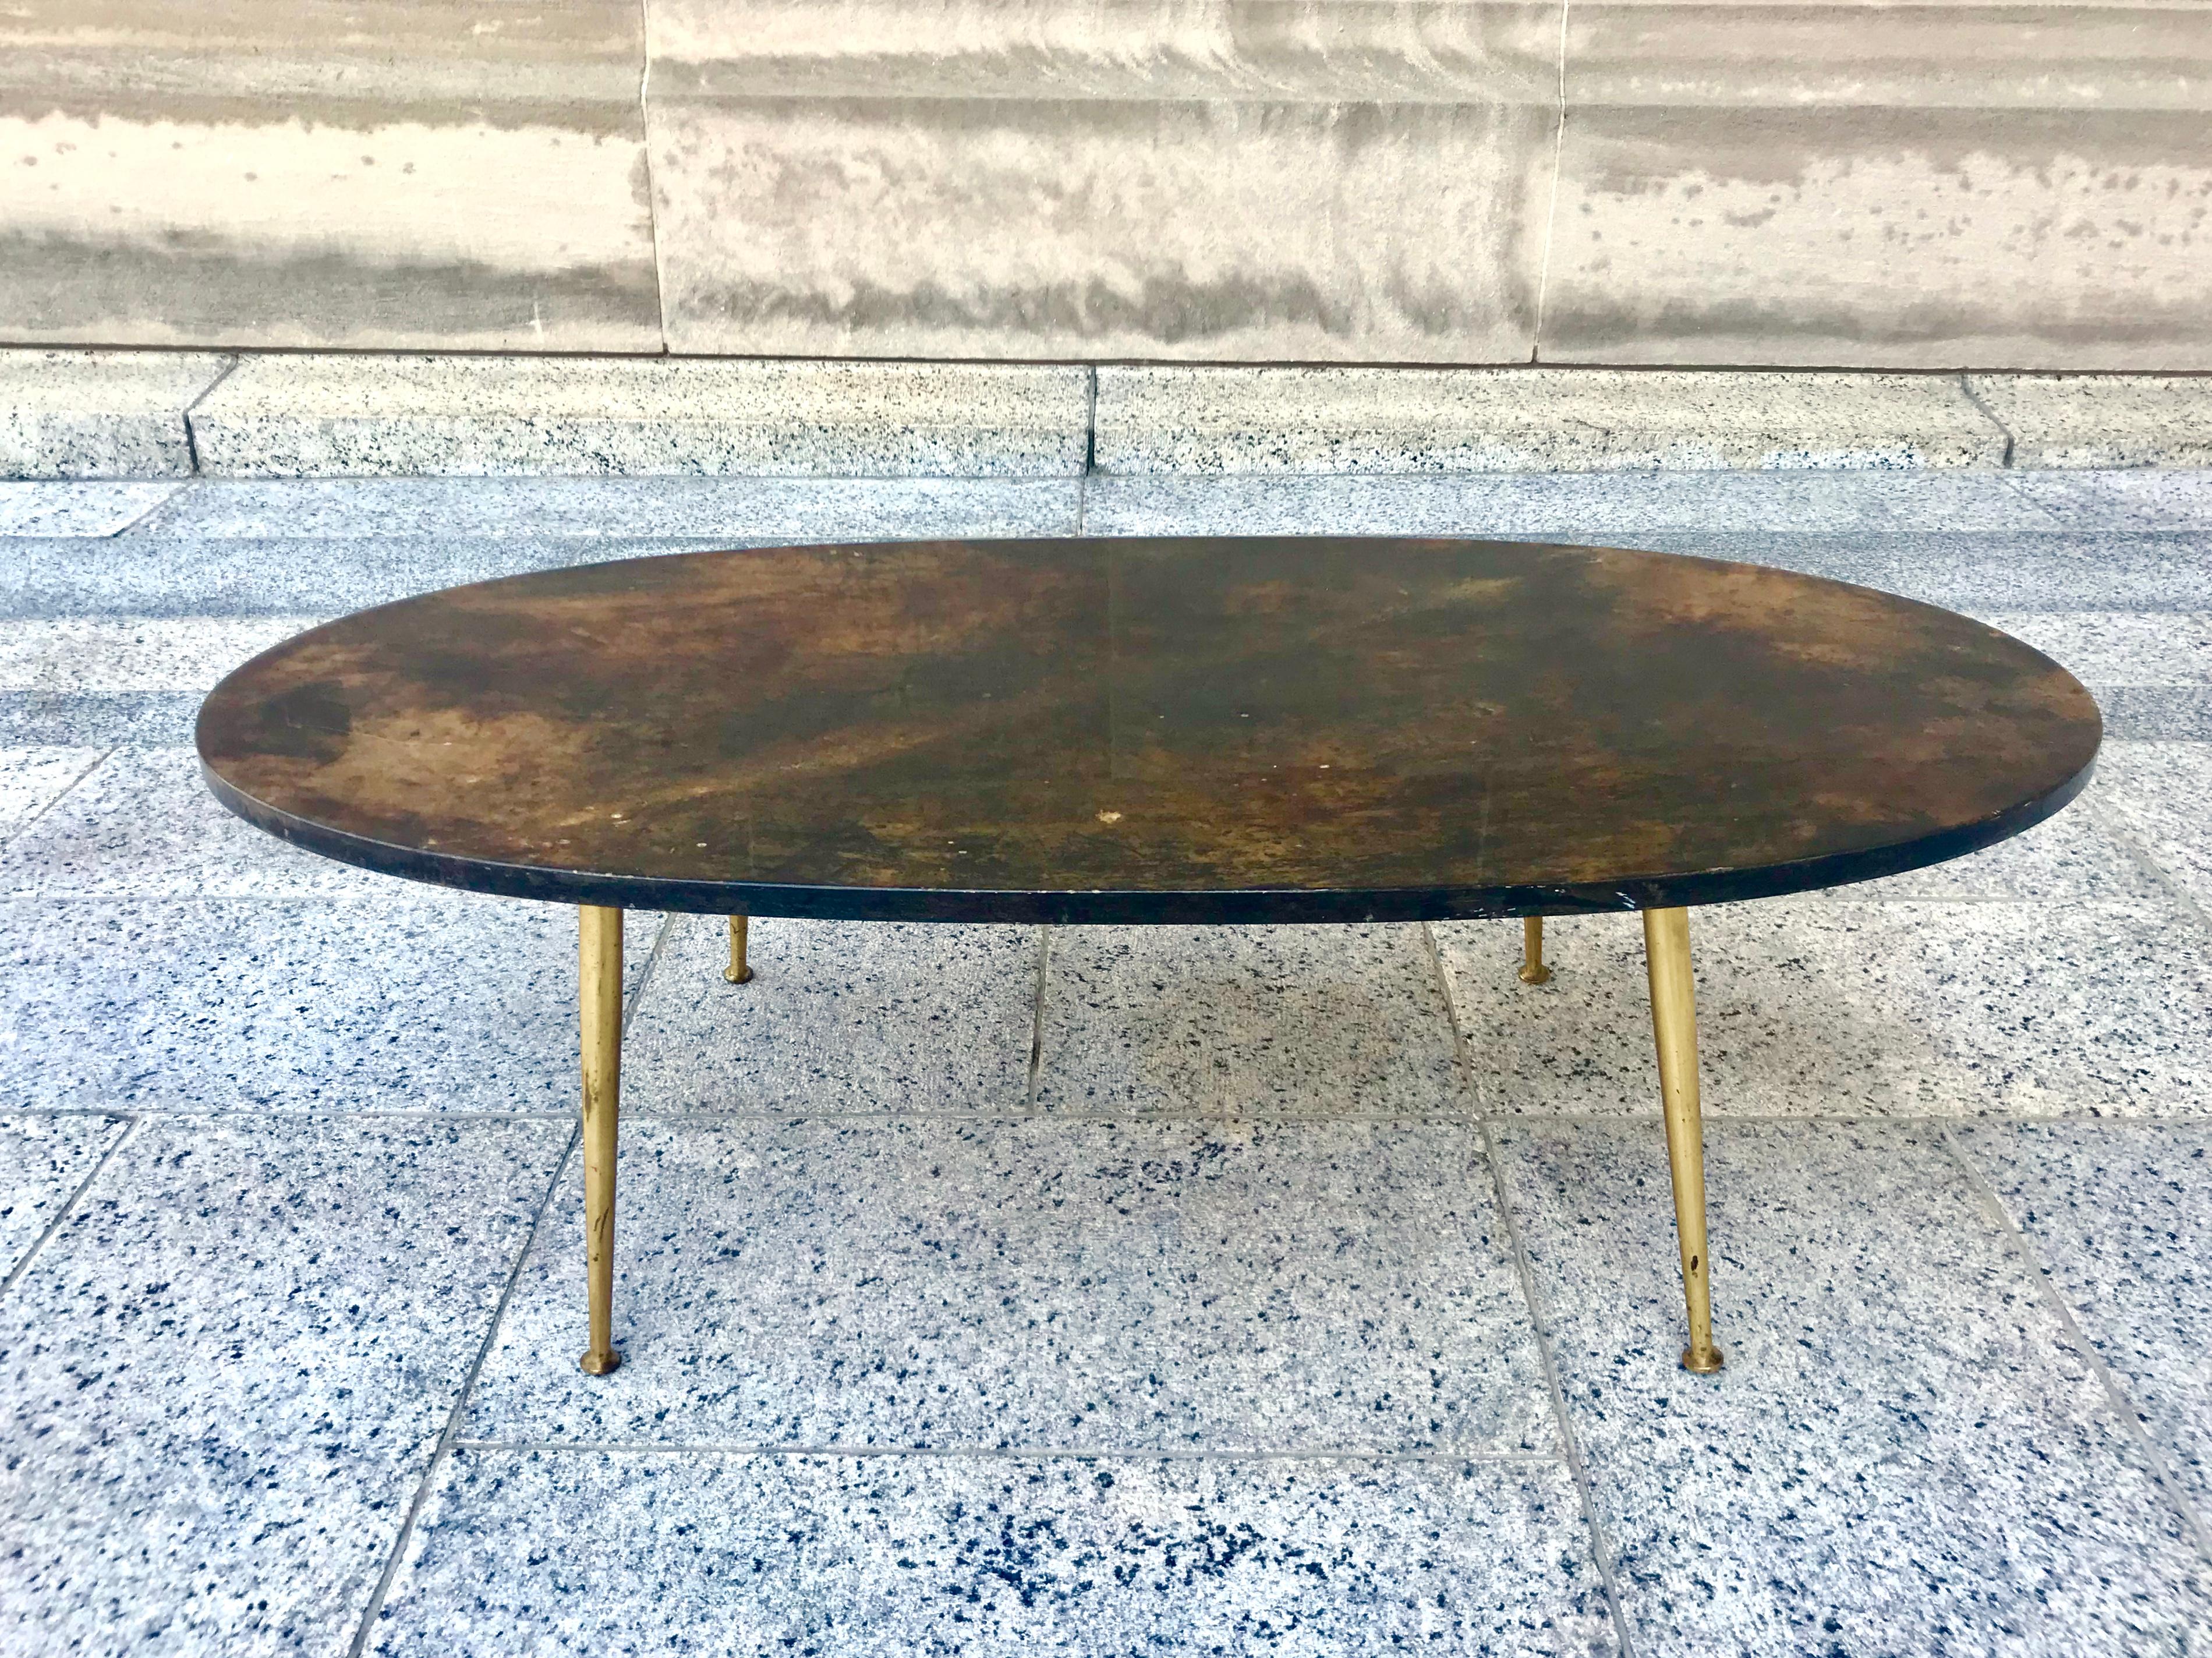 Fabulous and rare 1950s Italian Aldo Tura chocolate lacquered goatskin cocktail table with cast brass legs. We covet these Tura pieces, and this is certainly one of the nicest table we’ve had by him!